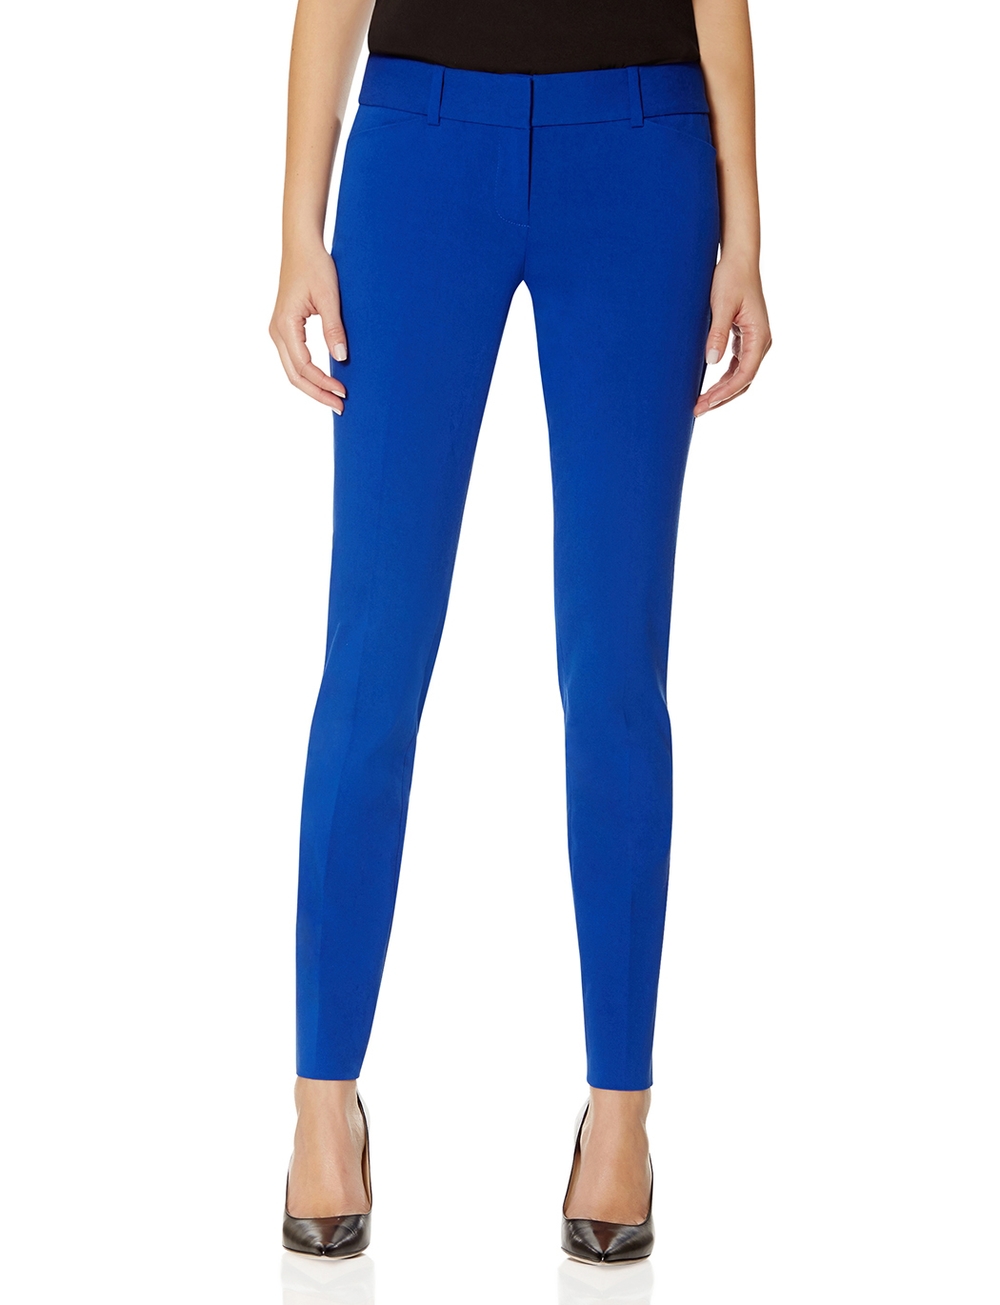  Exact Stretch skinny pants. (Machine washable!). The Limited. $69.90. BOGO right now.  